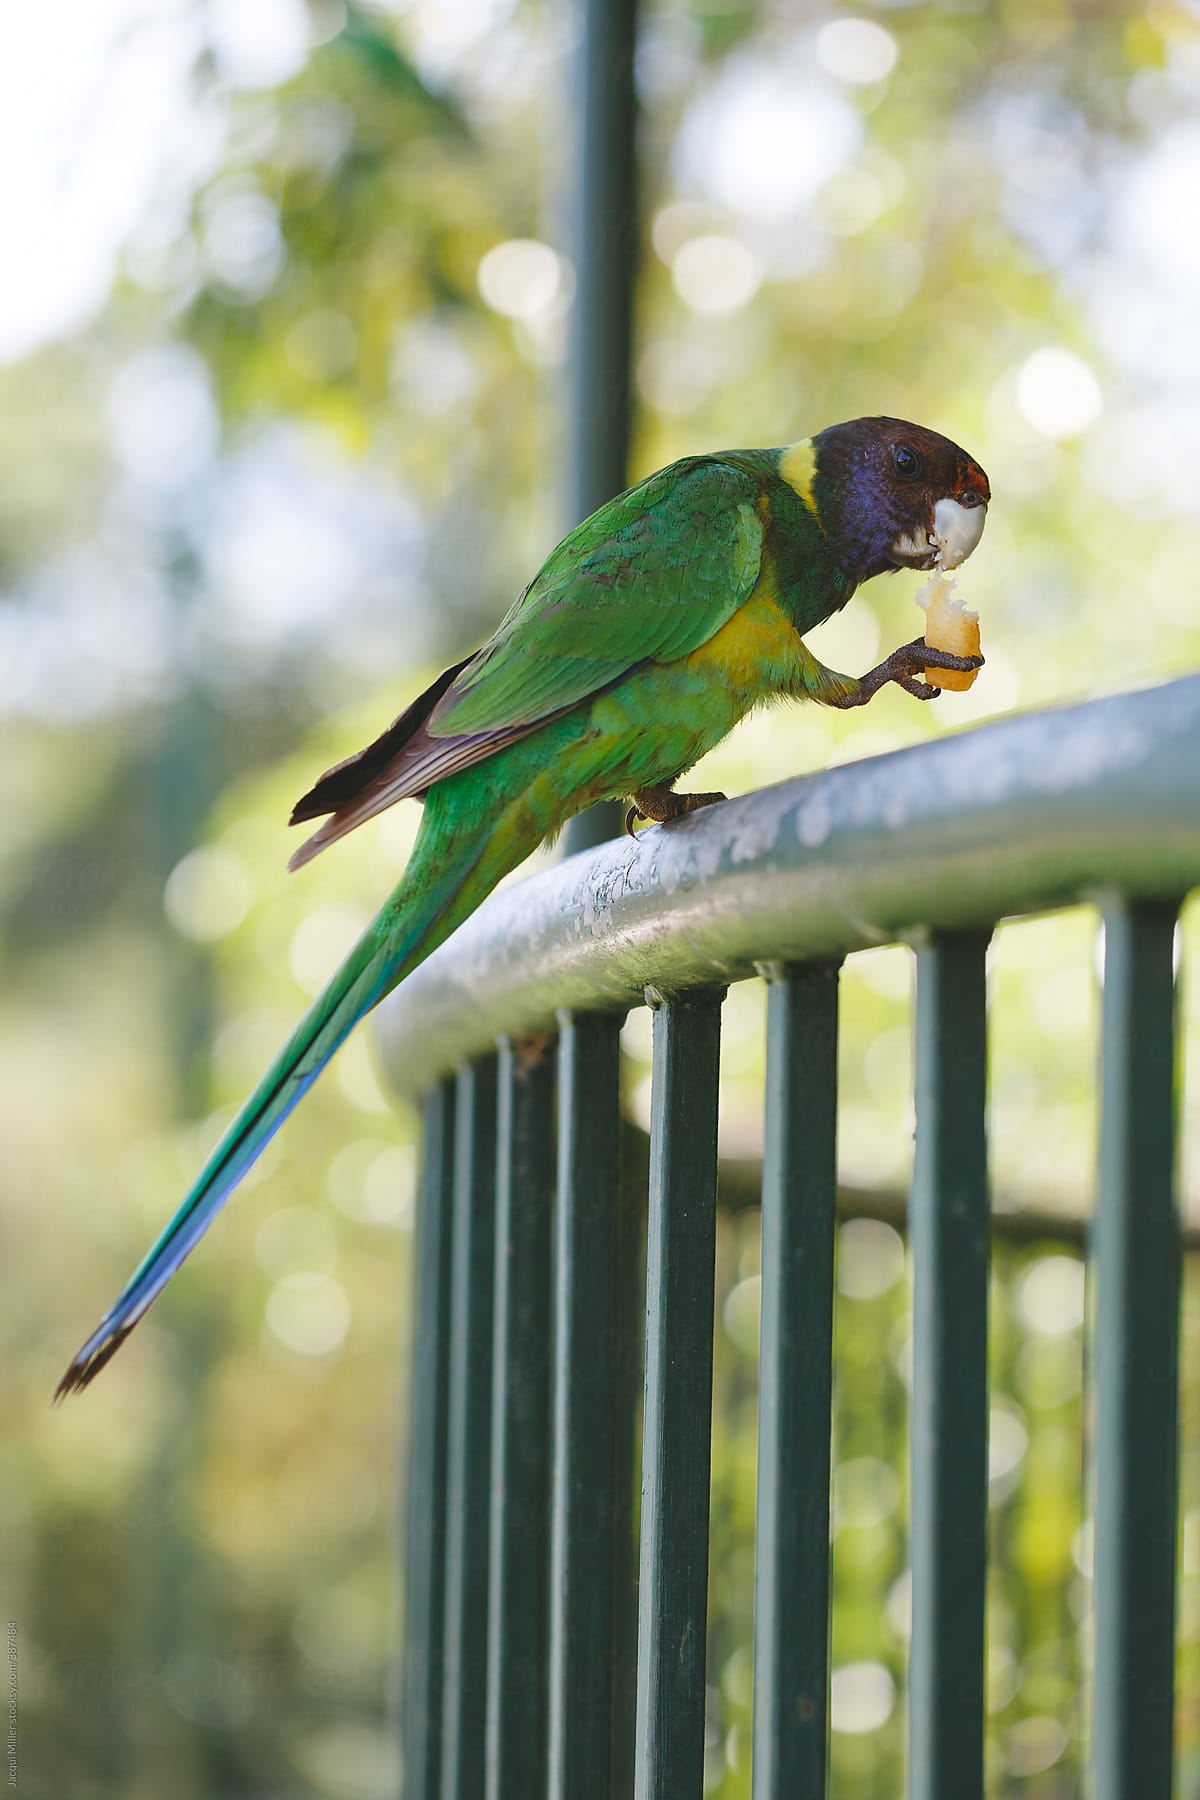 Bright green parrot eating a chip